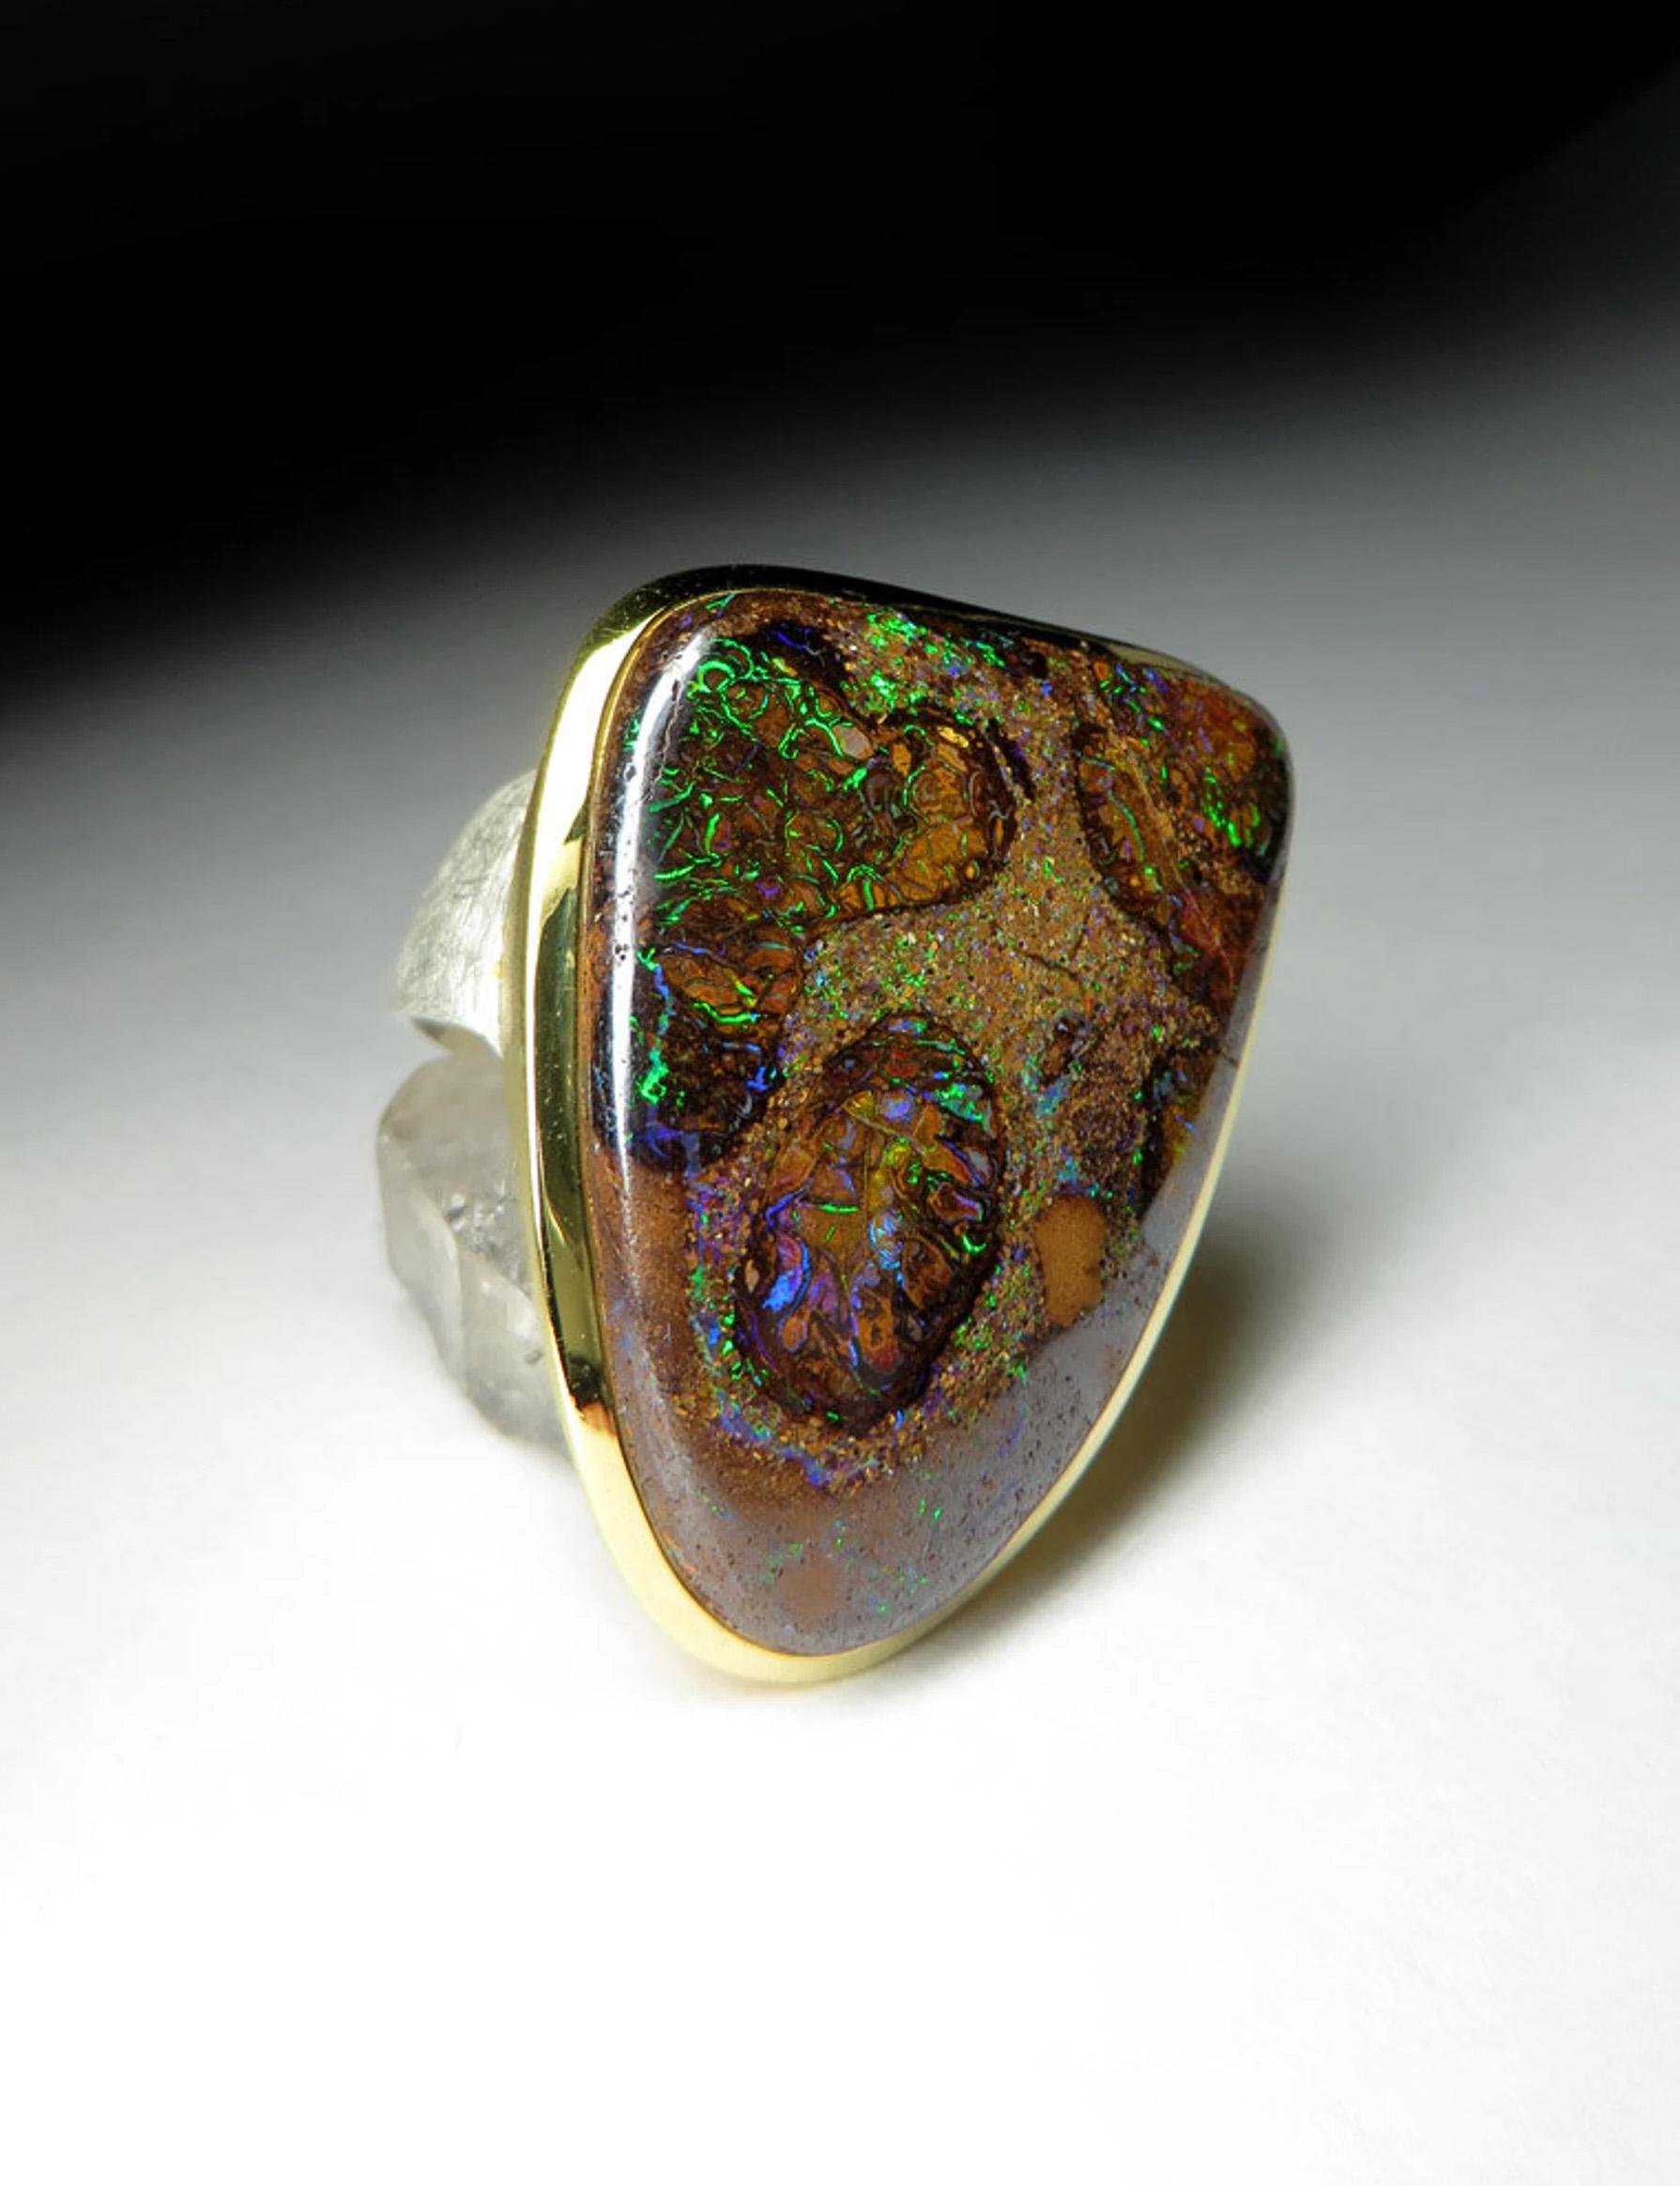 Large 18K gold plated silver ring with natural Boulder Opal 
gemstone origin - Australia
ring weight - 26.82 grams
ring size - 10.25 US
gemstone size - 0.28 х 0.98 x 1.38 in / 7 х 25 х 35 mm